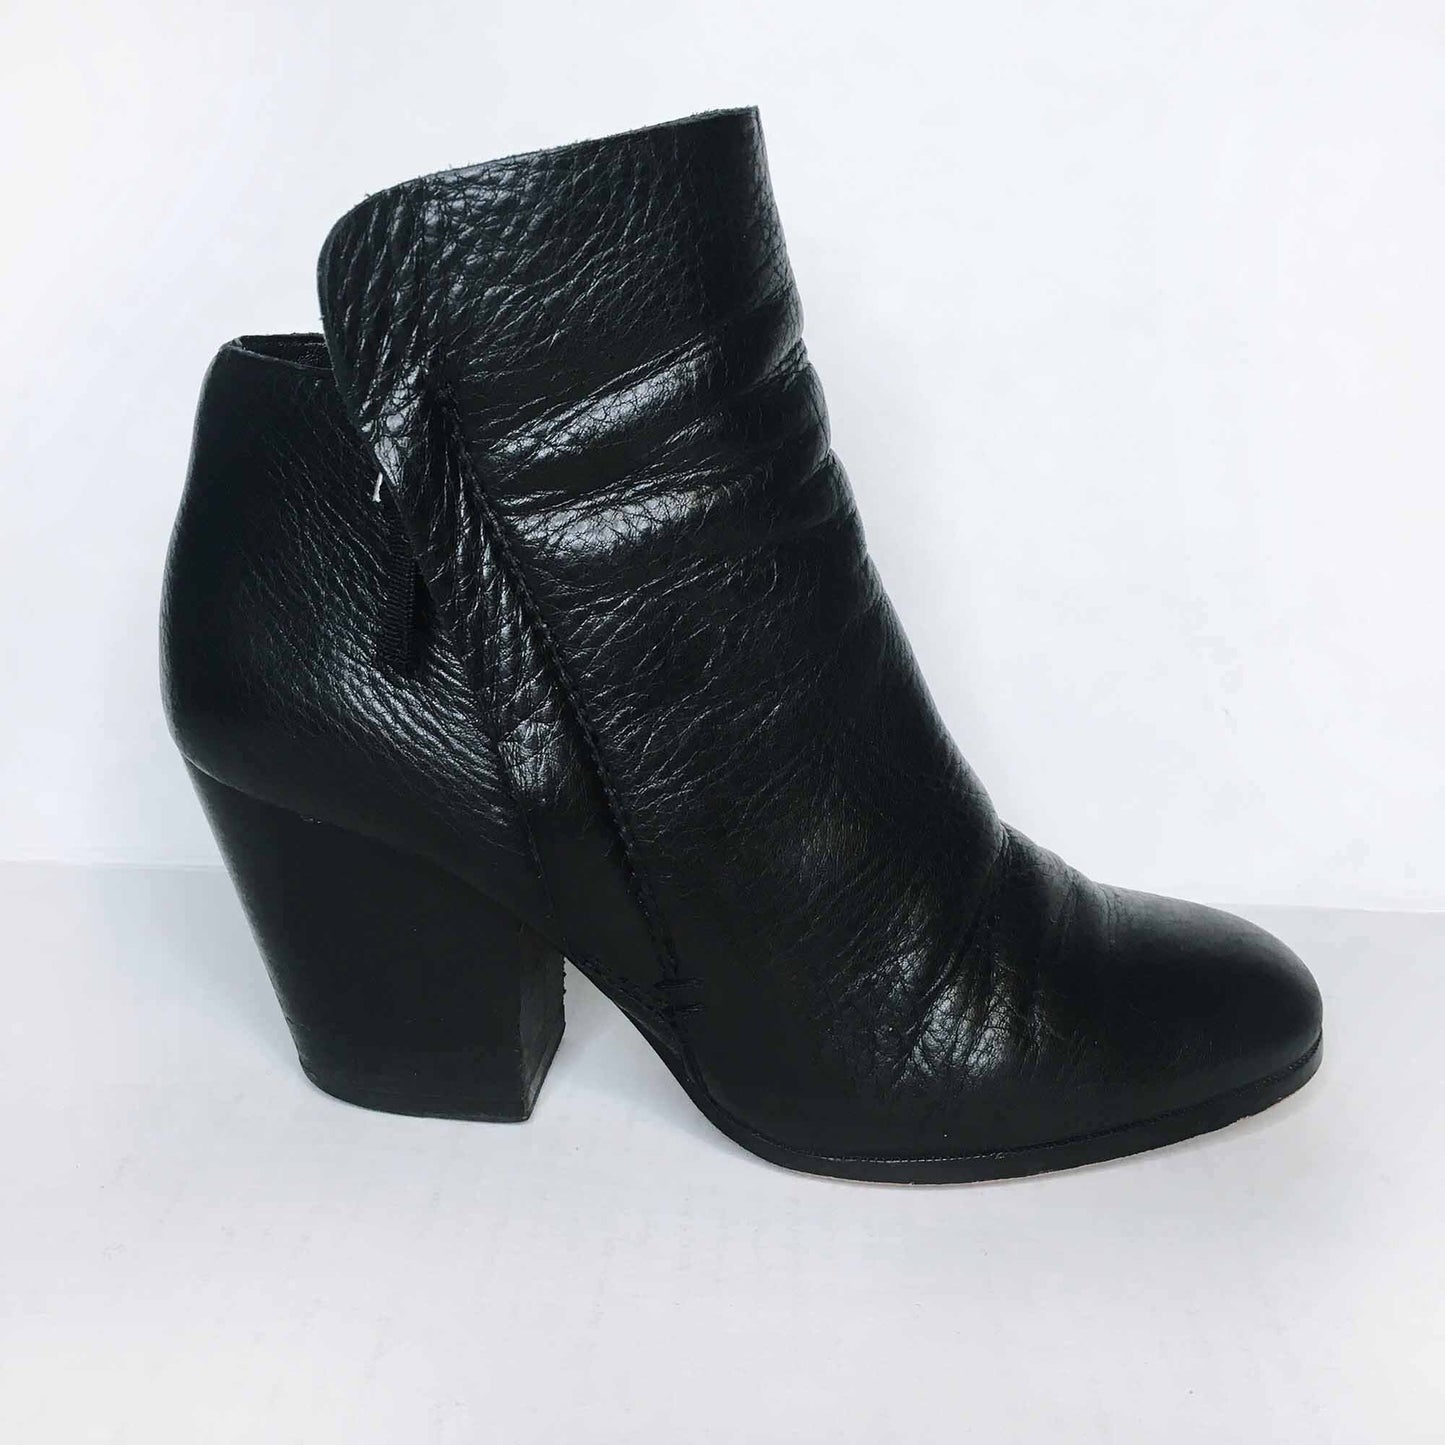 1.STATE taila heeled leather bootie - size 6.5